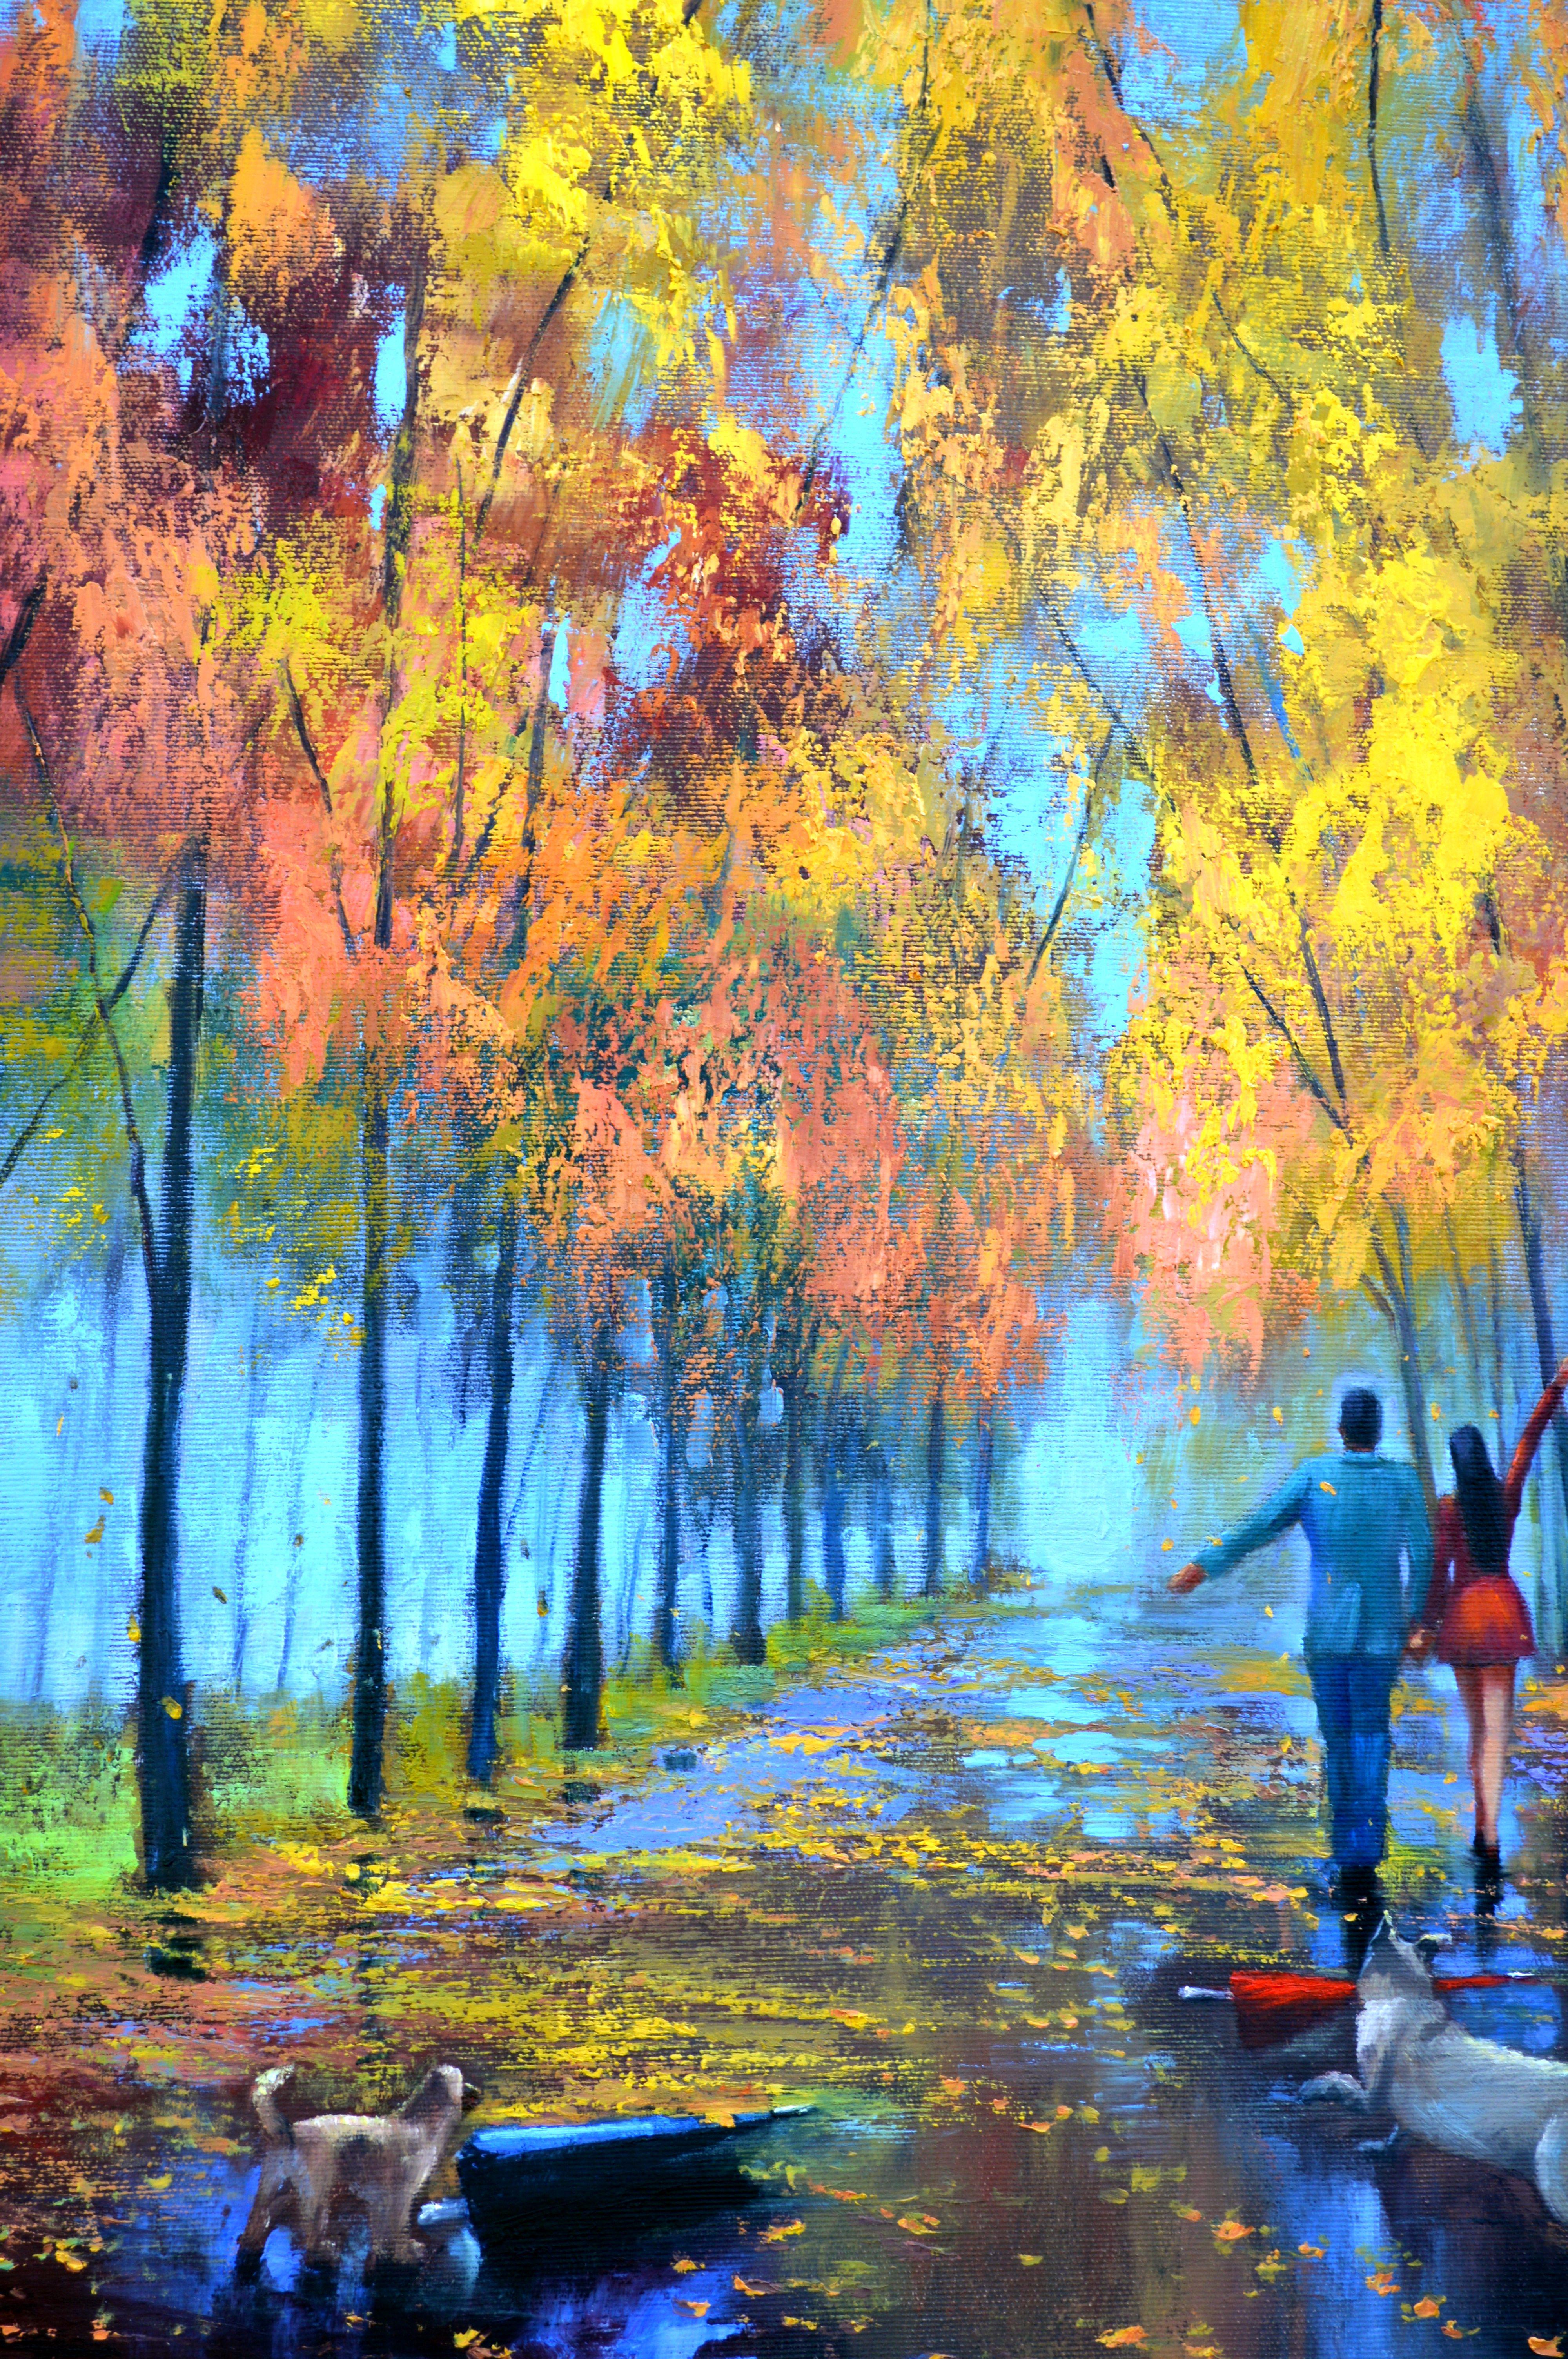 In this oil painting, I've intertwined expressionism with impressionist touches to capture a couple's serene walk under a vibrantly hued autumnal canopy. The realism of the wet path reflects life's journeys, while the fine art style enhances the